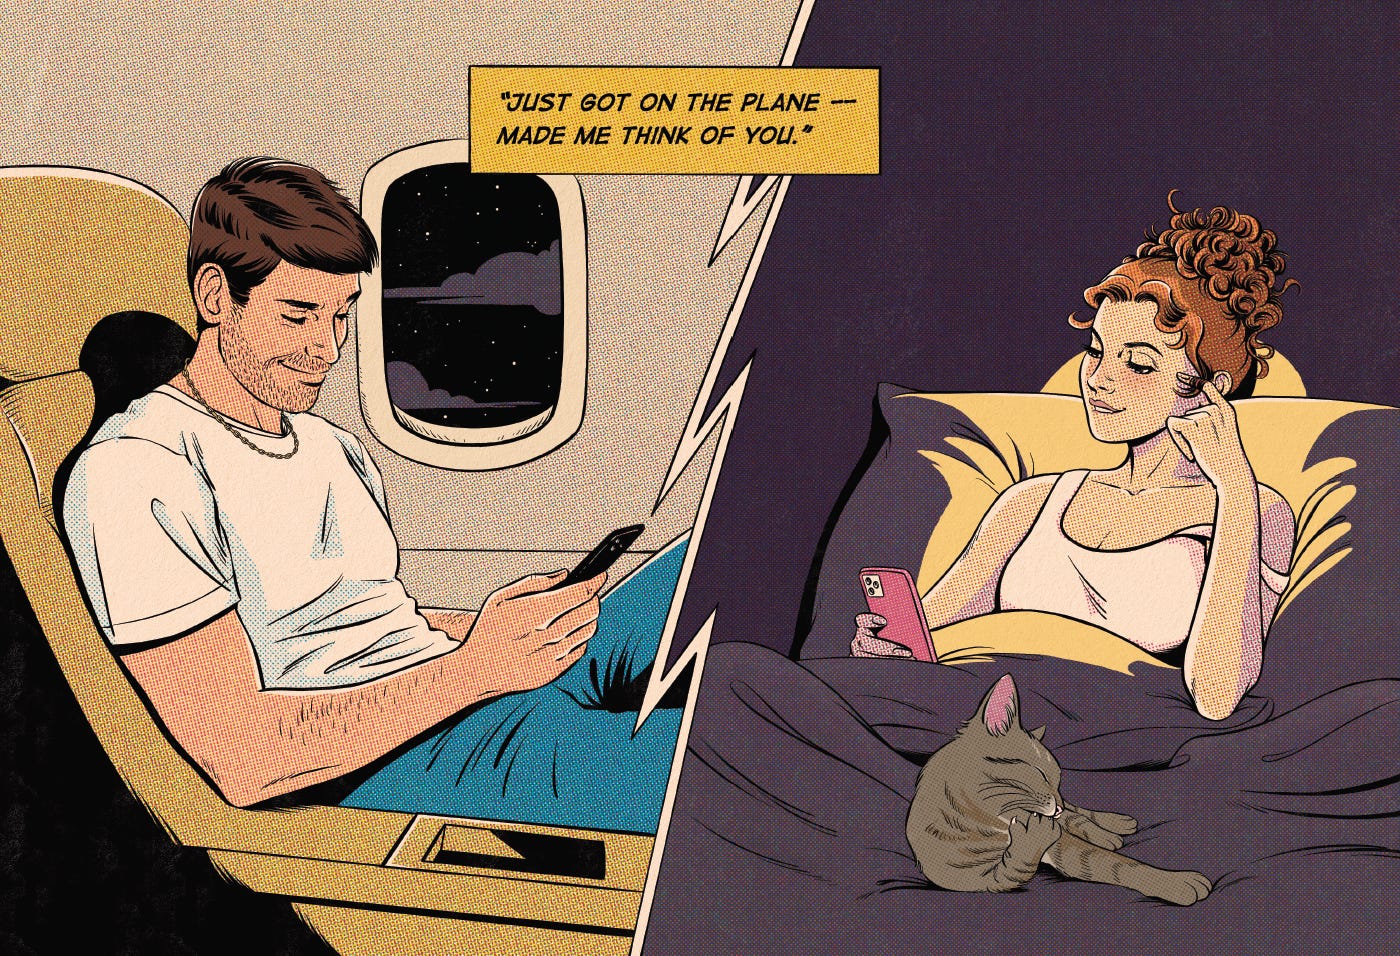 Illustration by Jenifer Prince, that shows a split screen where Chris is on the left (white man with brown hair, a bit of stubble, wearing a white t-shirt and jeans and a chain), smiling down at his phone on an airplane at night; and on the right is Daphne (white woman with reddish curly hair up in a messy bun, dressed in a pinkish white tank top), and she's twirling her hair around her finger and biting her lip, looking down at her own phone in bed at night, with text over that says "Just got on the plane -- made me think of you"